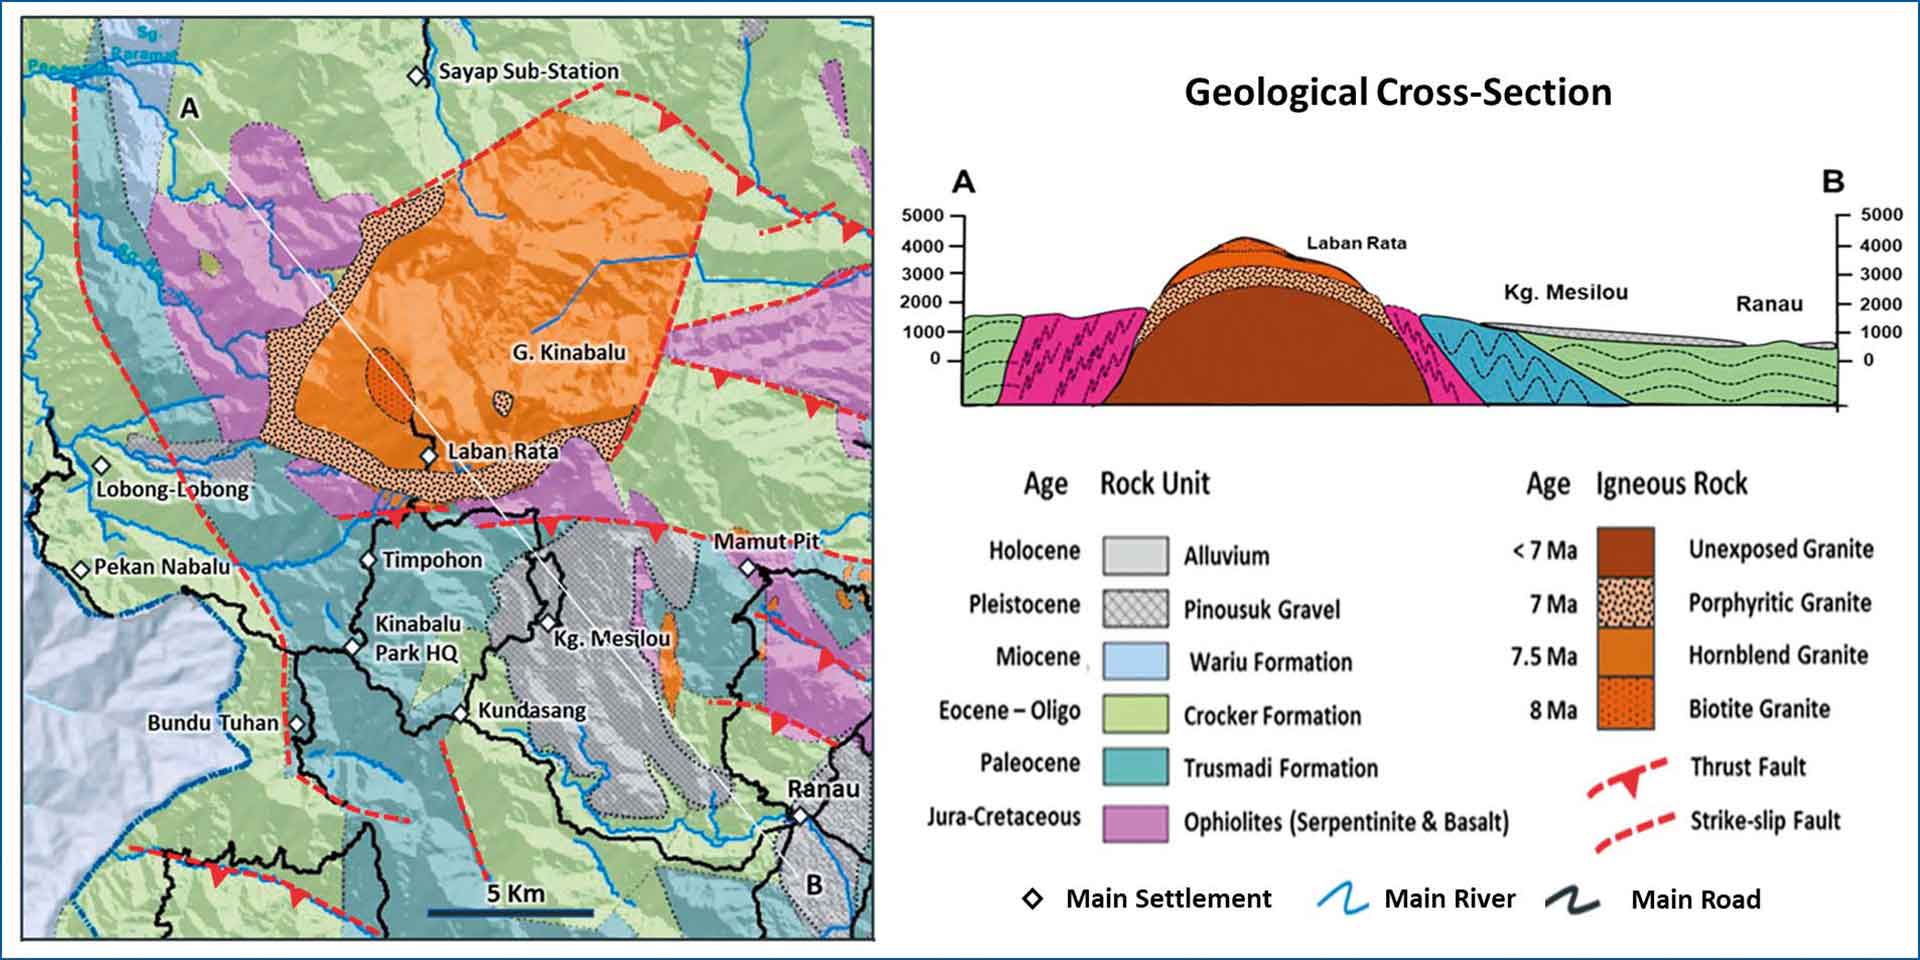 A geological map of the Mount Kinabalu area showing the distribution